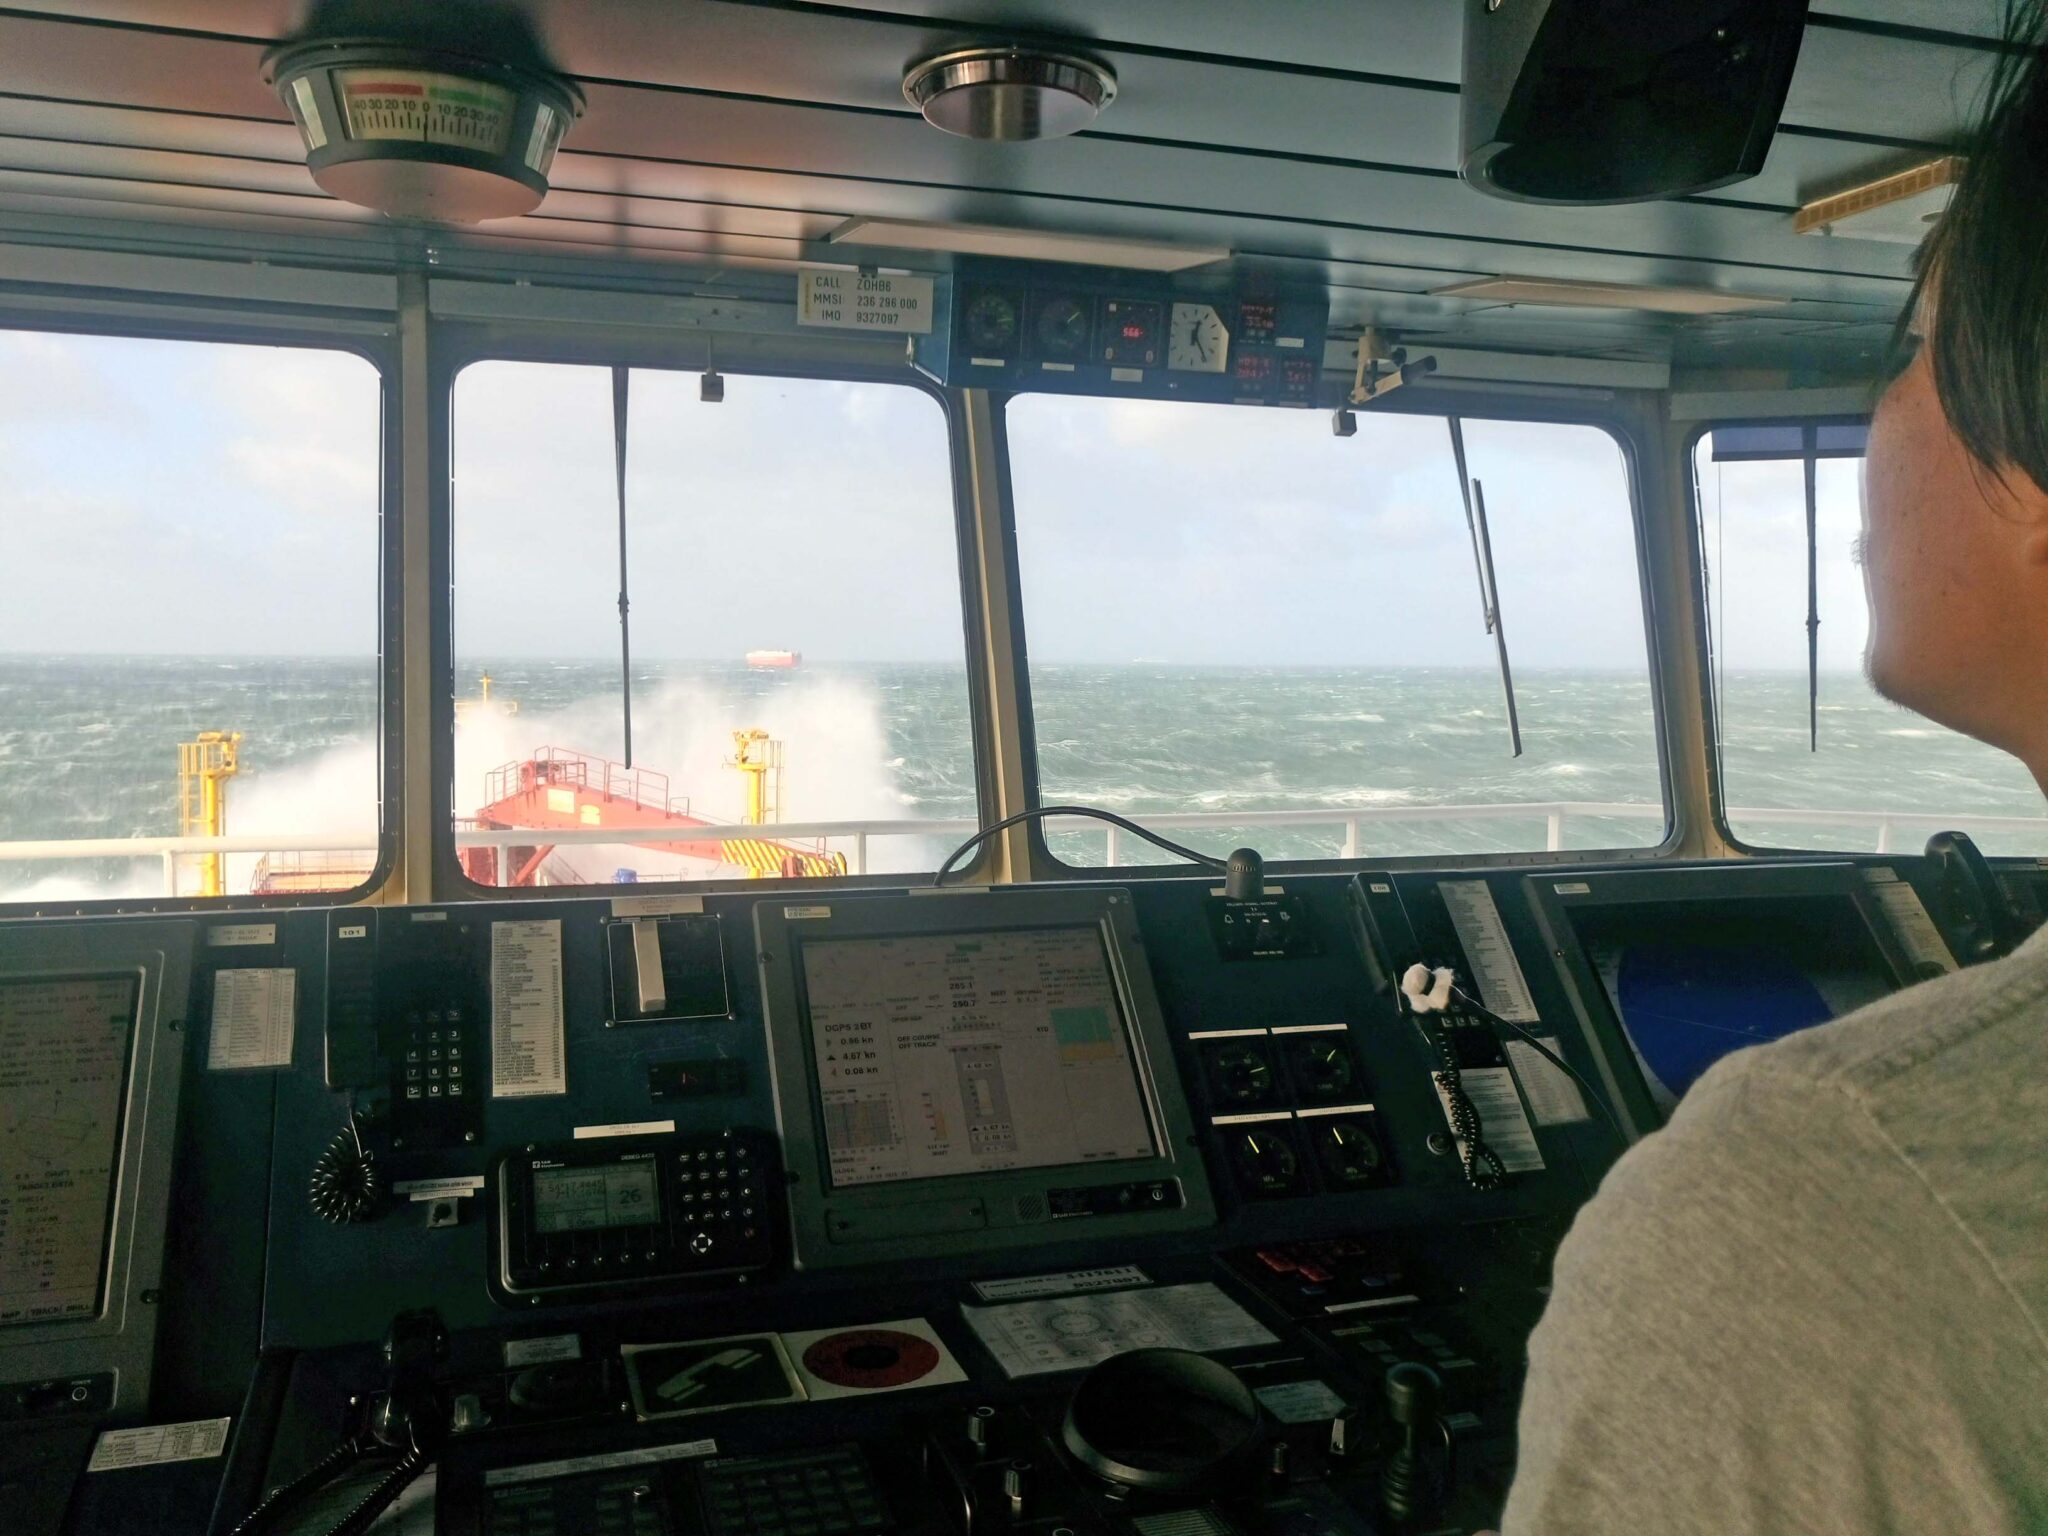 Helmsman steering the ship on a very rough weather.